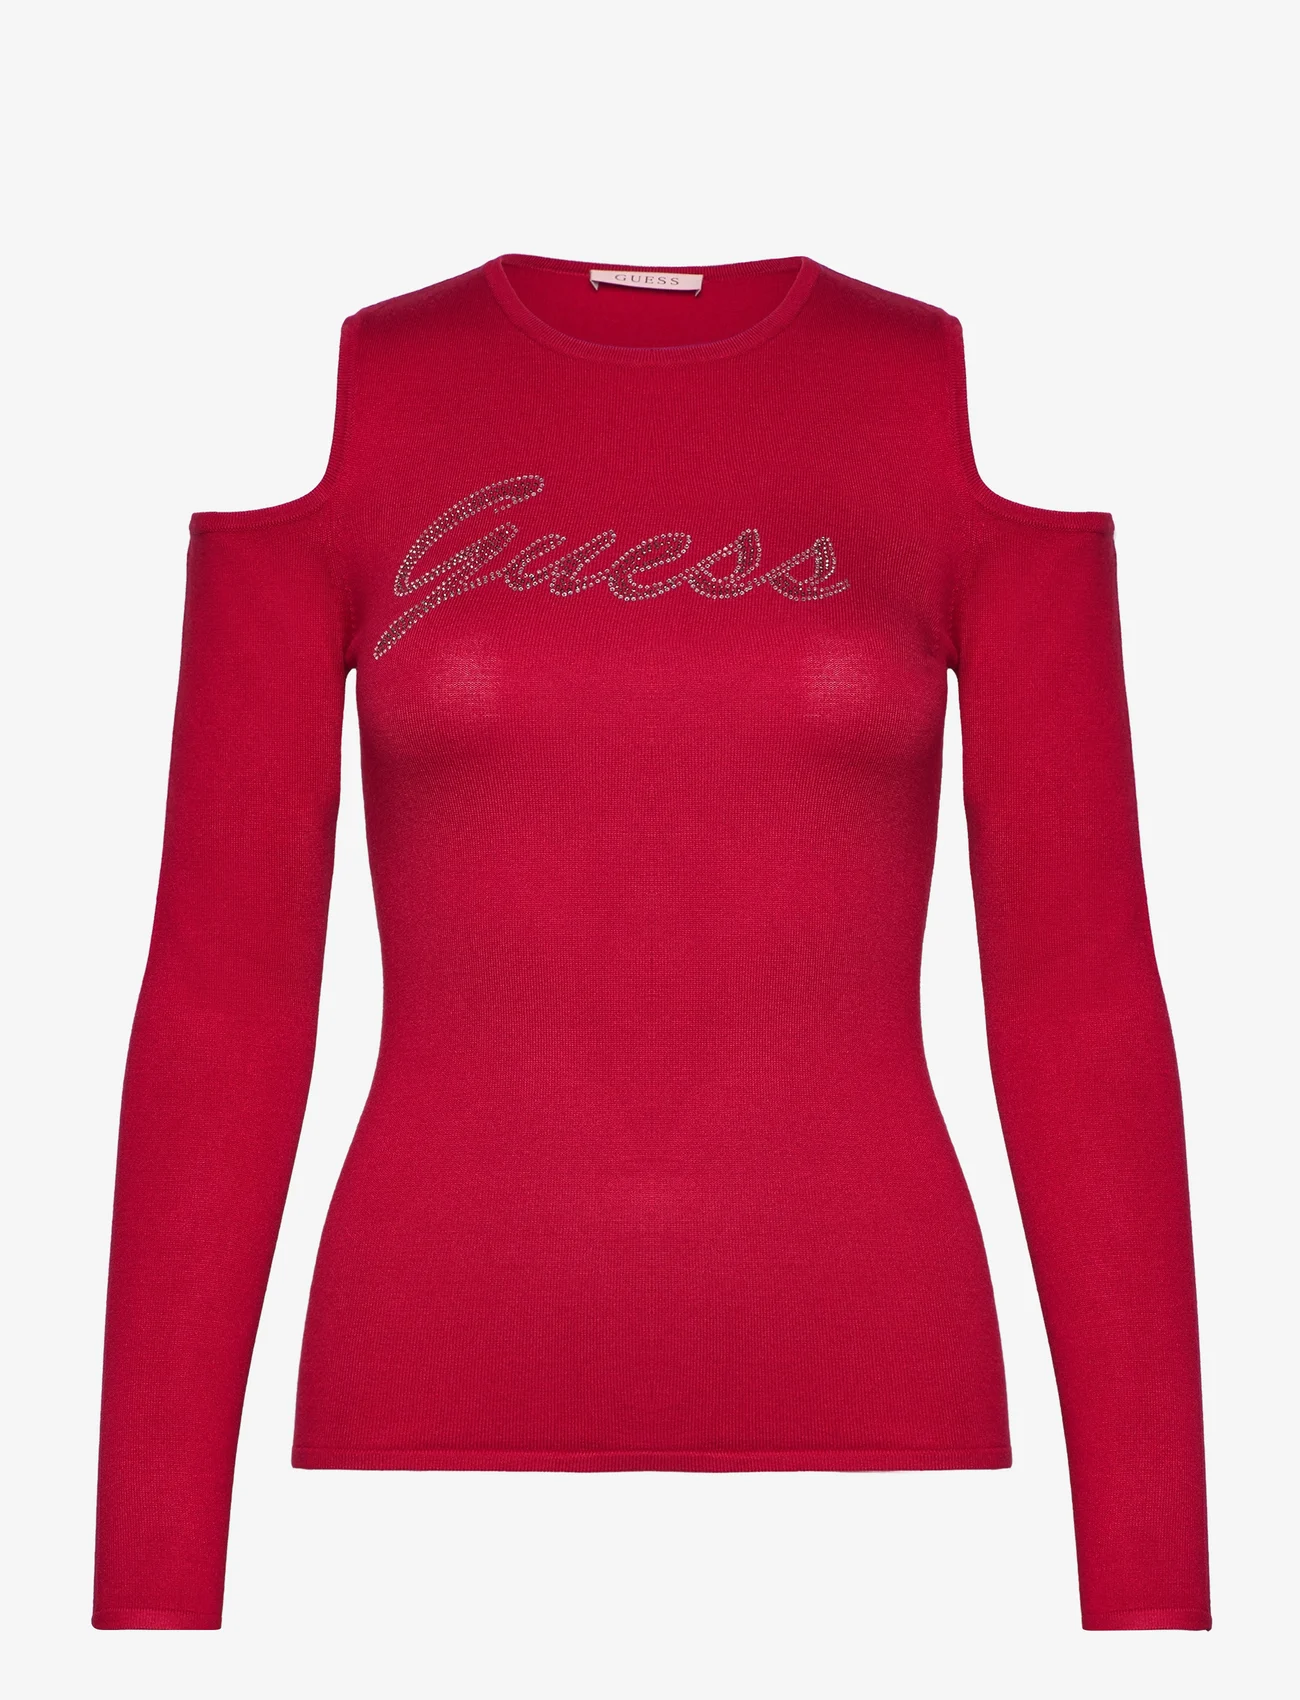 GUESS Jeans - LS COLD SHLDR GUESS LOGO SWTR - langärmlige tops - chili red - 0